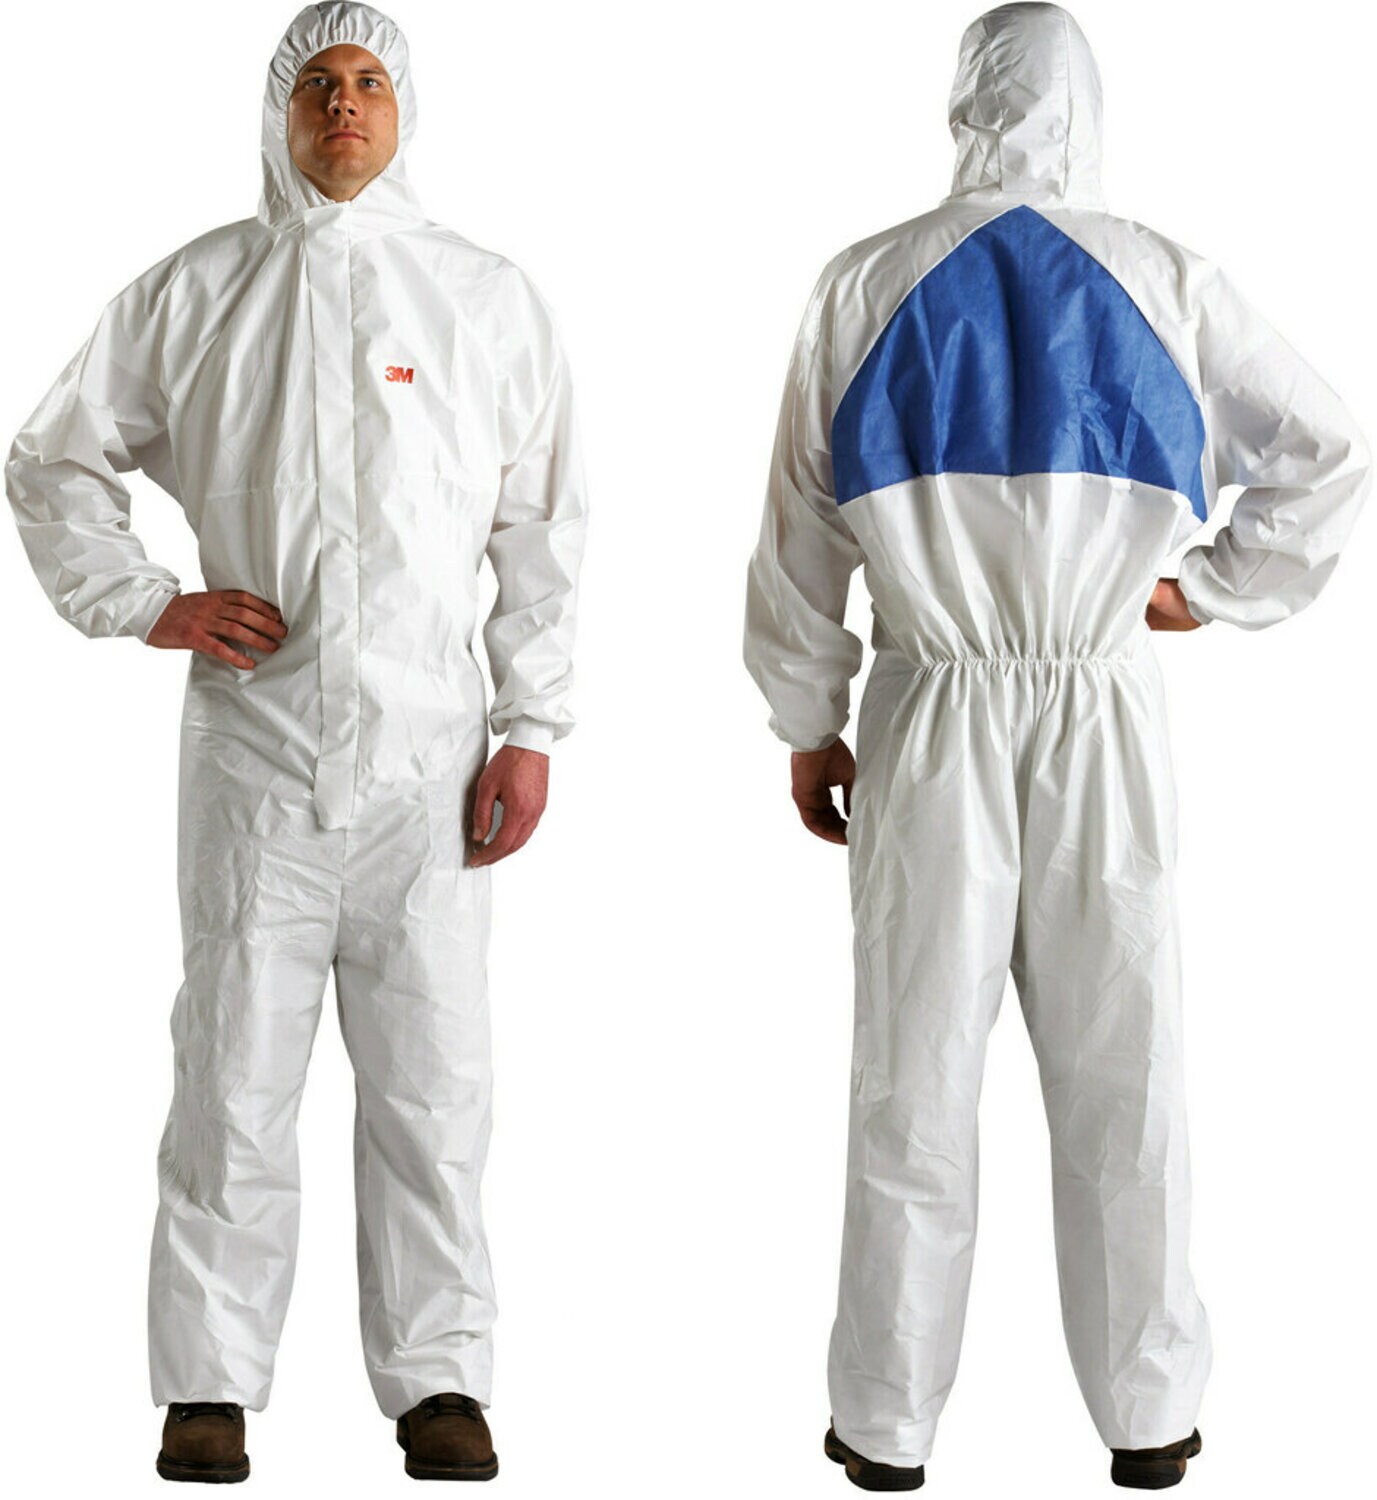 7100213296 - 3M Protective Coverall 4540+ White & Blue Type 5/6 Size 3XL, 25 EA/Case